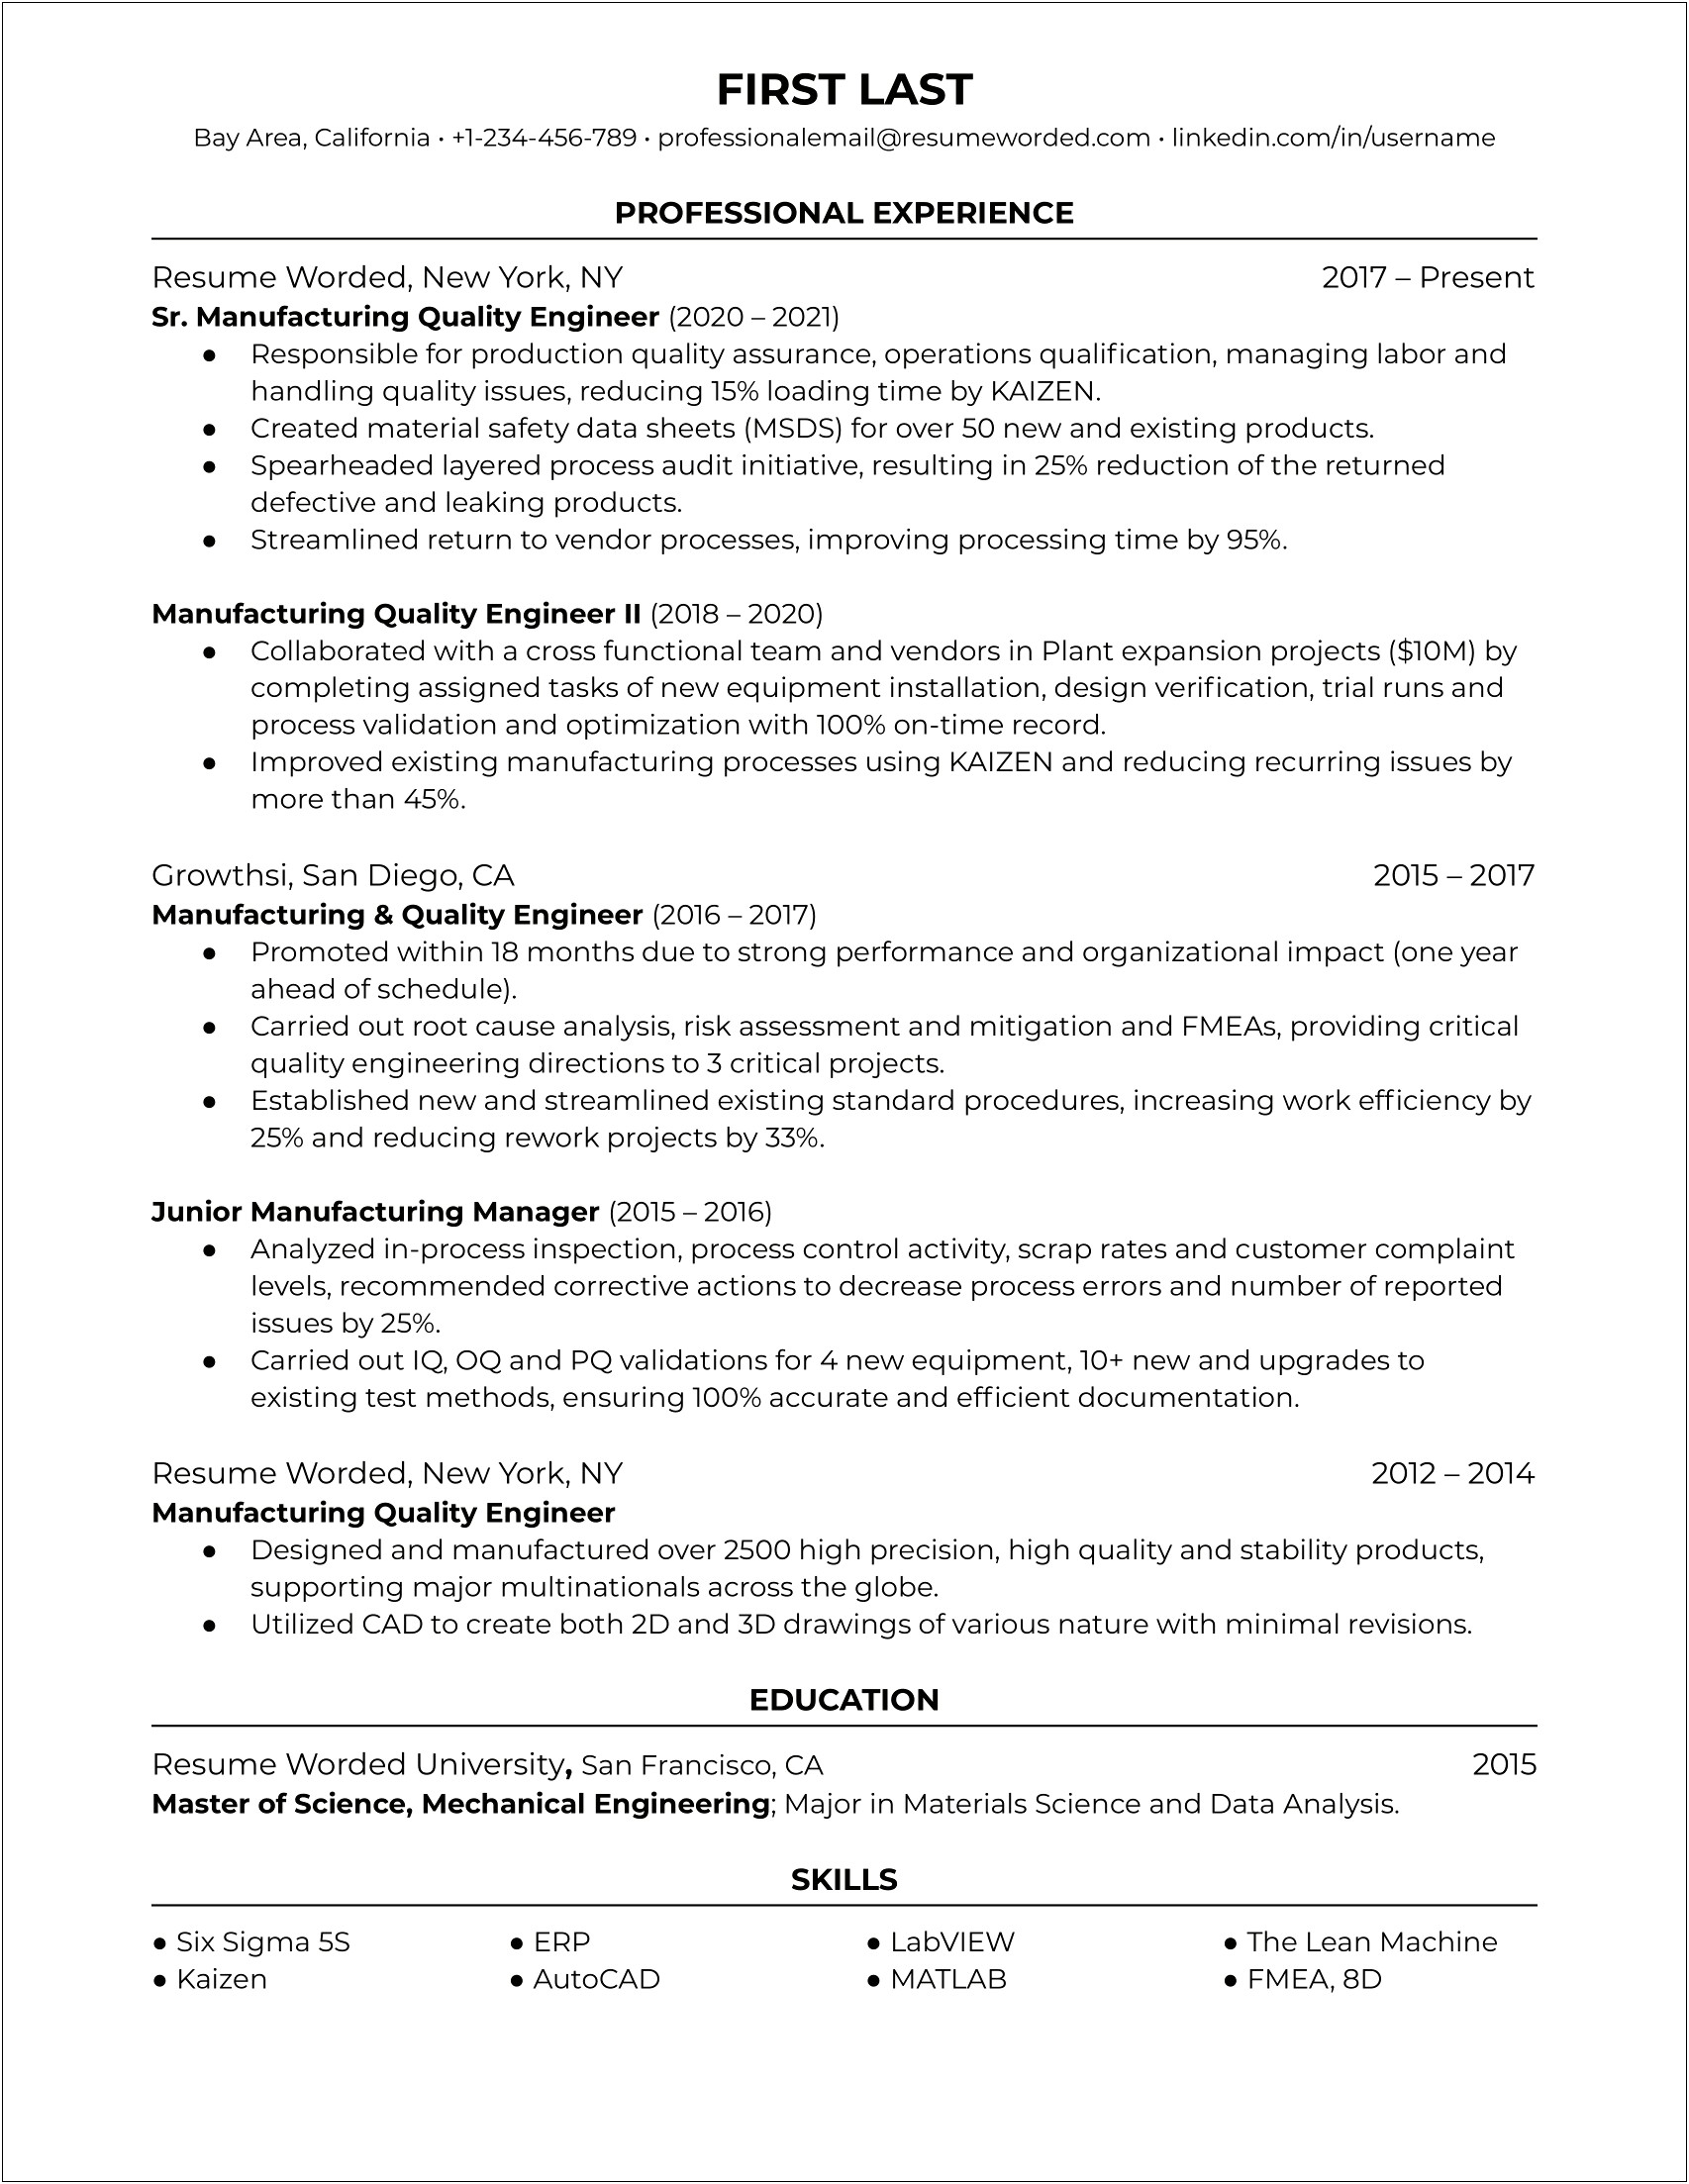 Quality Inspector Job Qualities For Resume